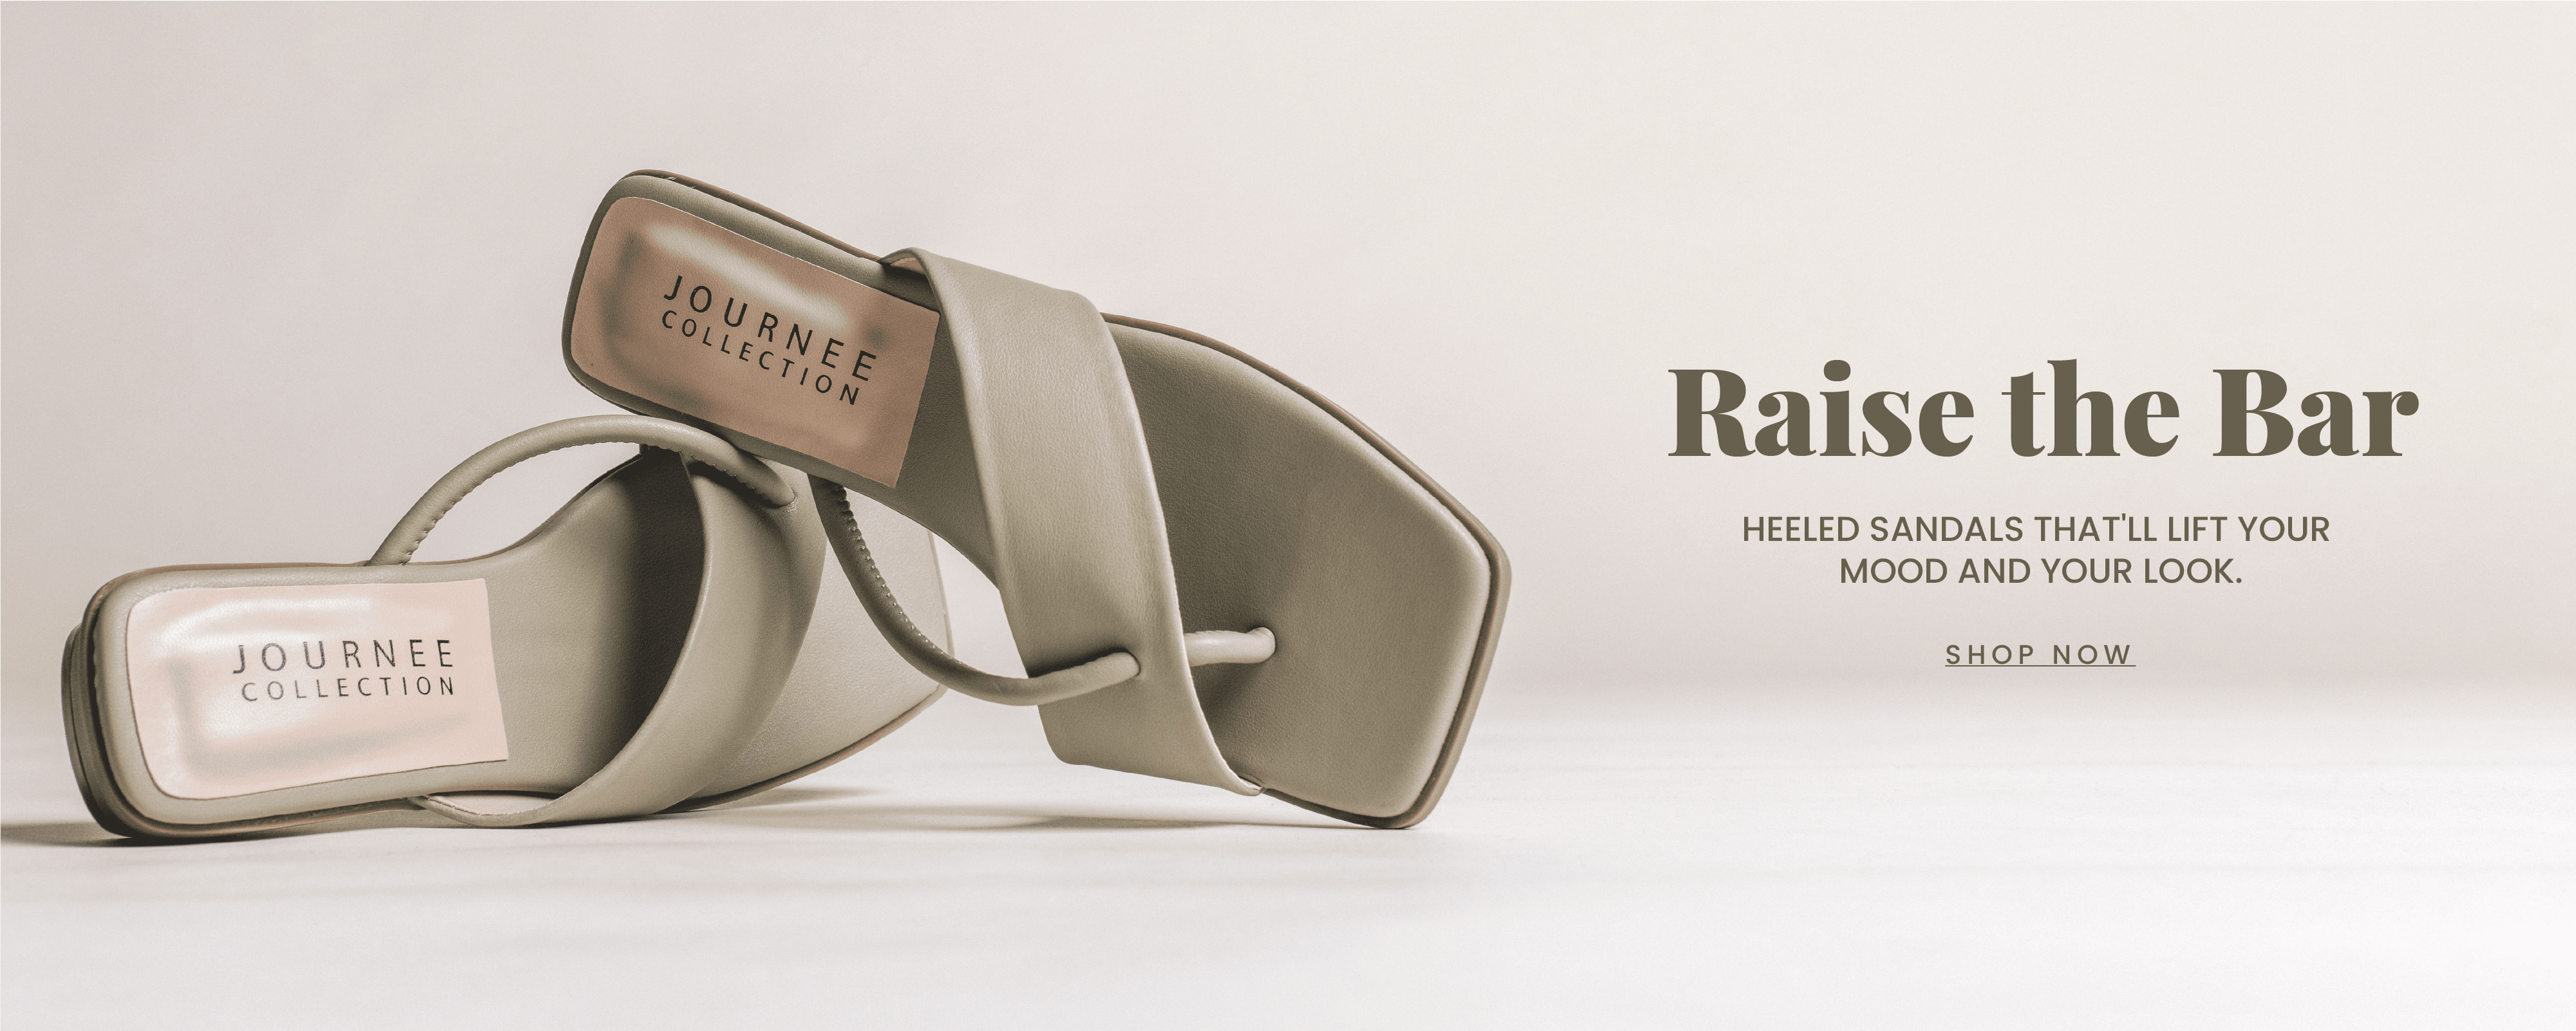 "Raise the Bar" header in olive green with "heeled sandals that will lift your mood and look" sub header. Olive green heeled sandals with asymmetrical straps are in focus. "Shop Now" call to action. 